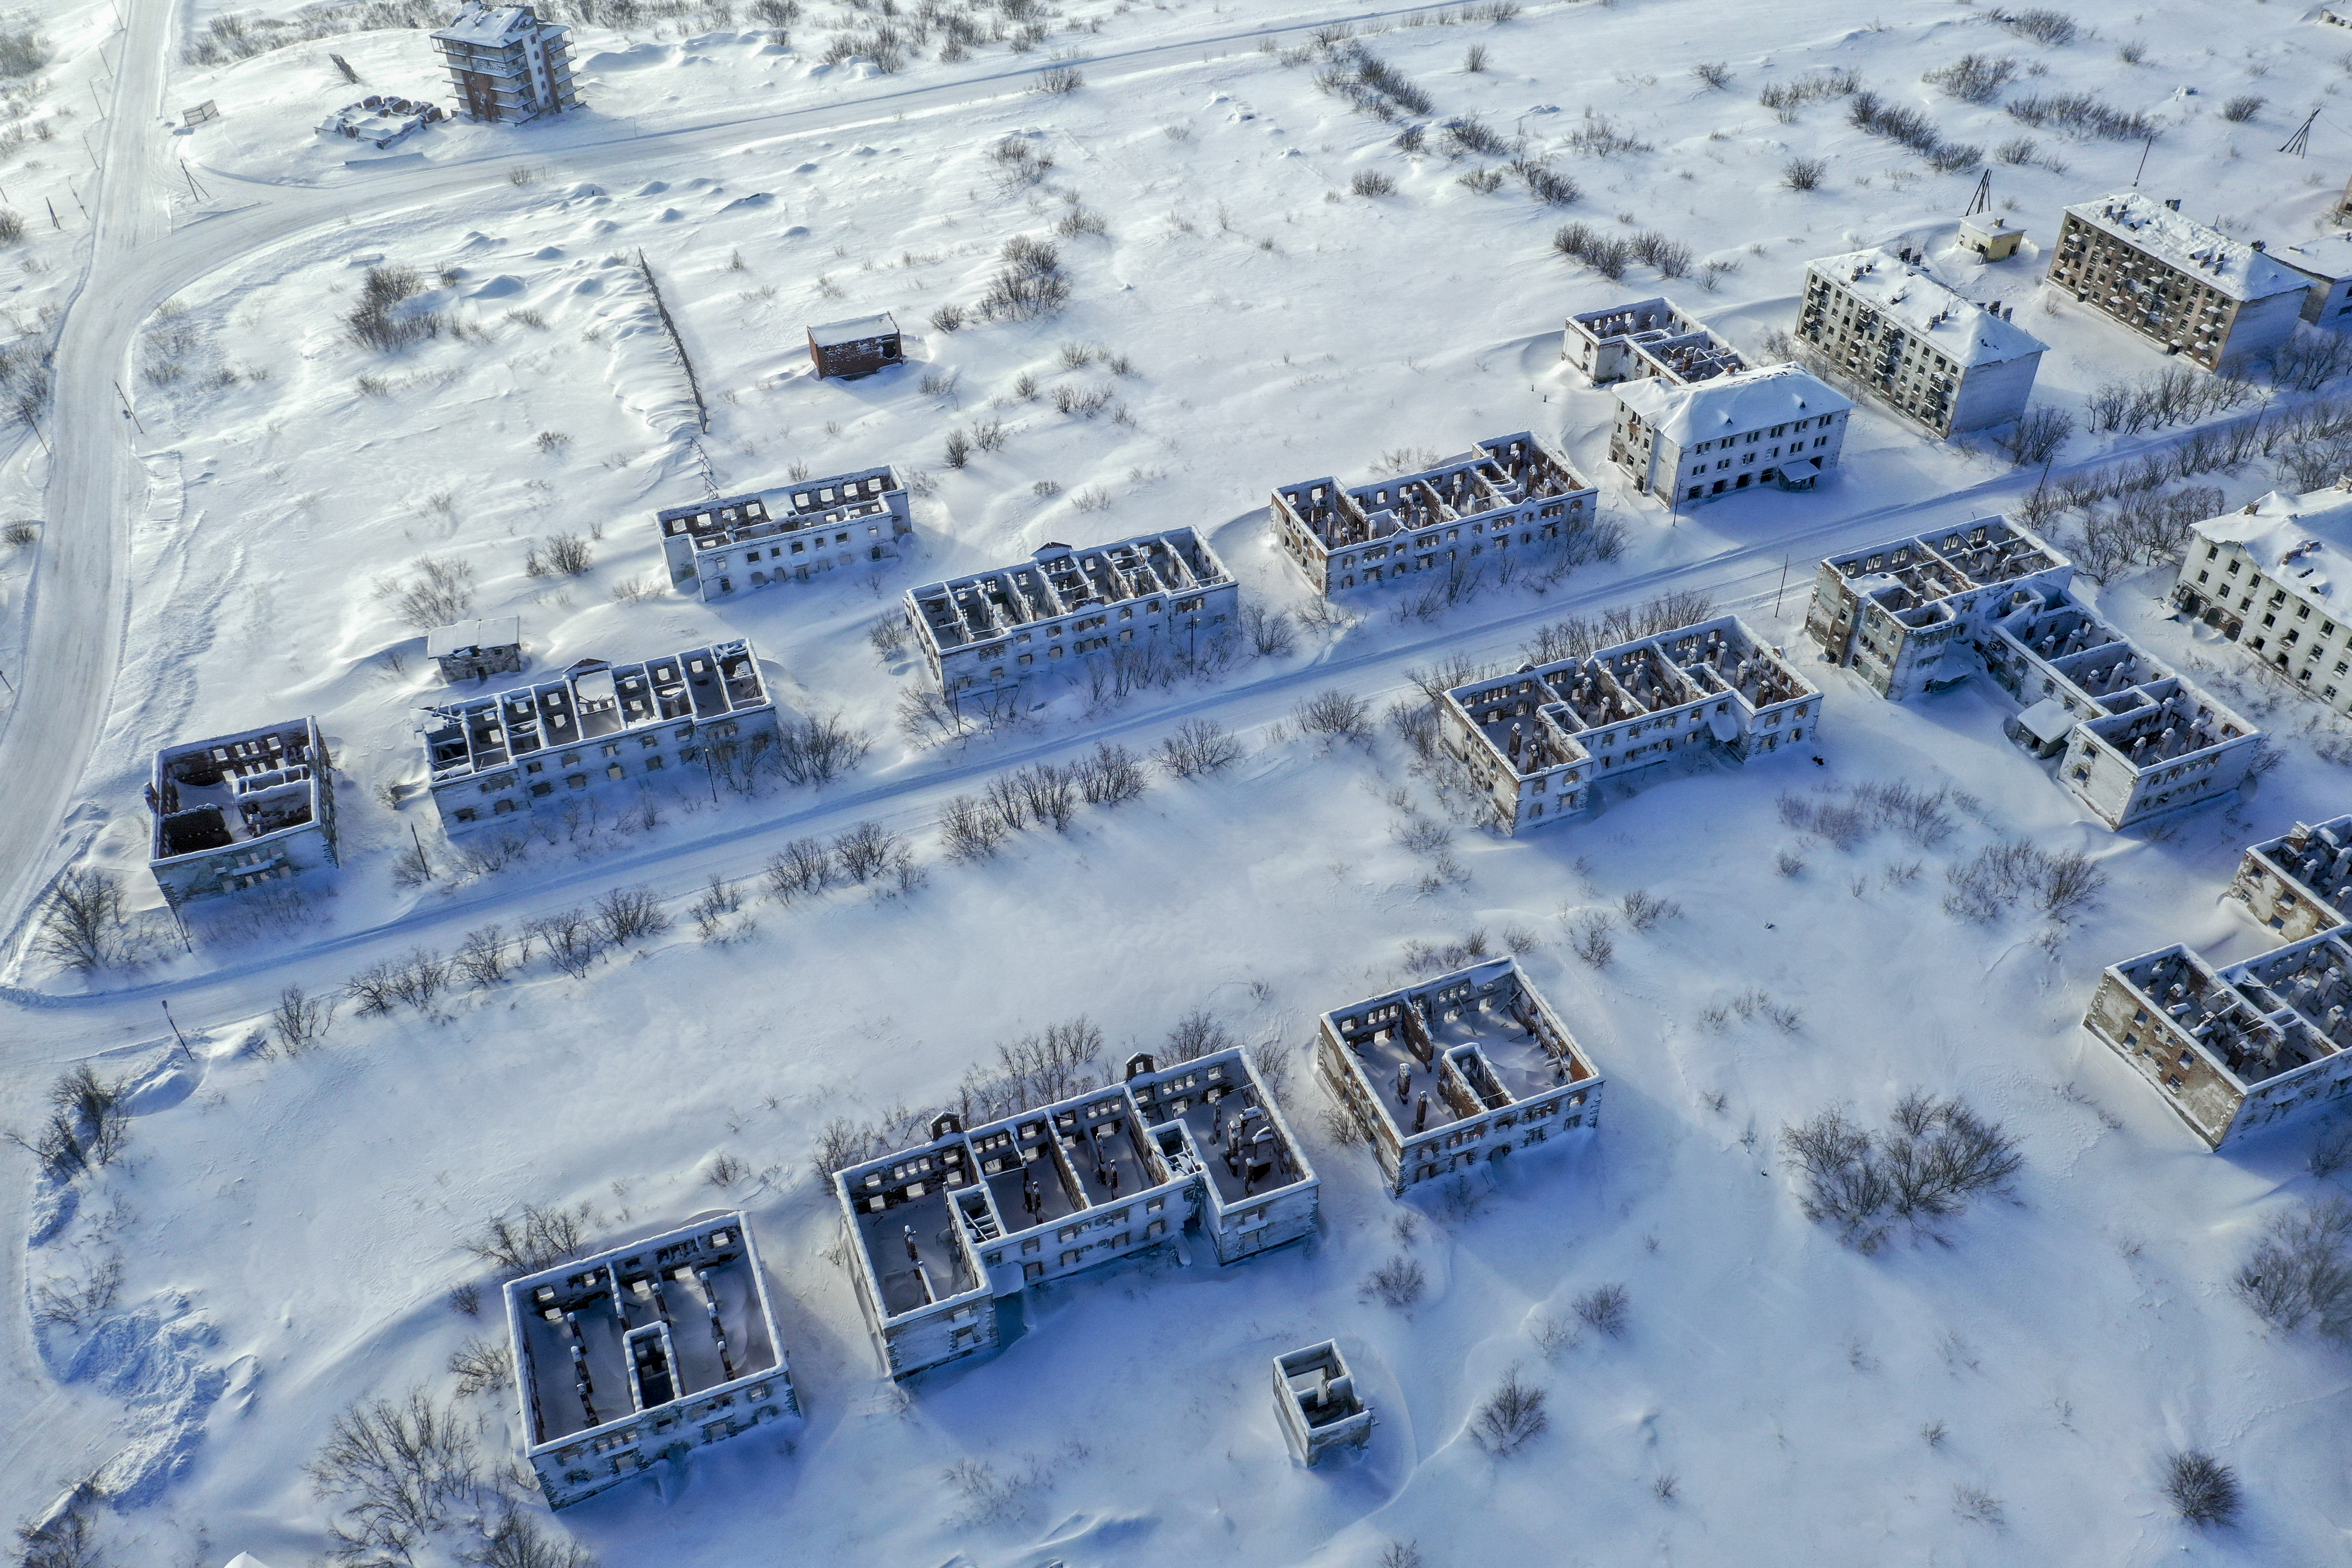 The village of Zapolyarny abandoned to its fate under snow in Vorkuta